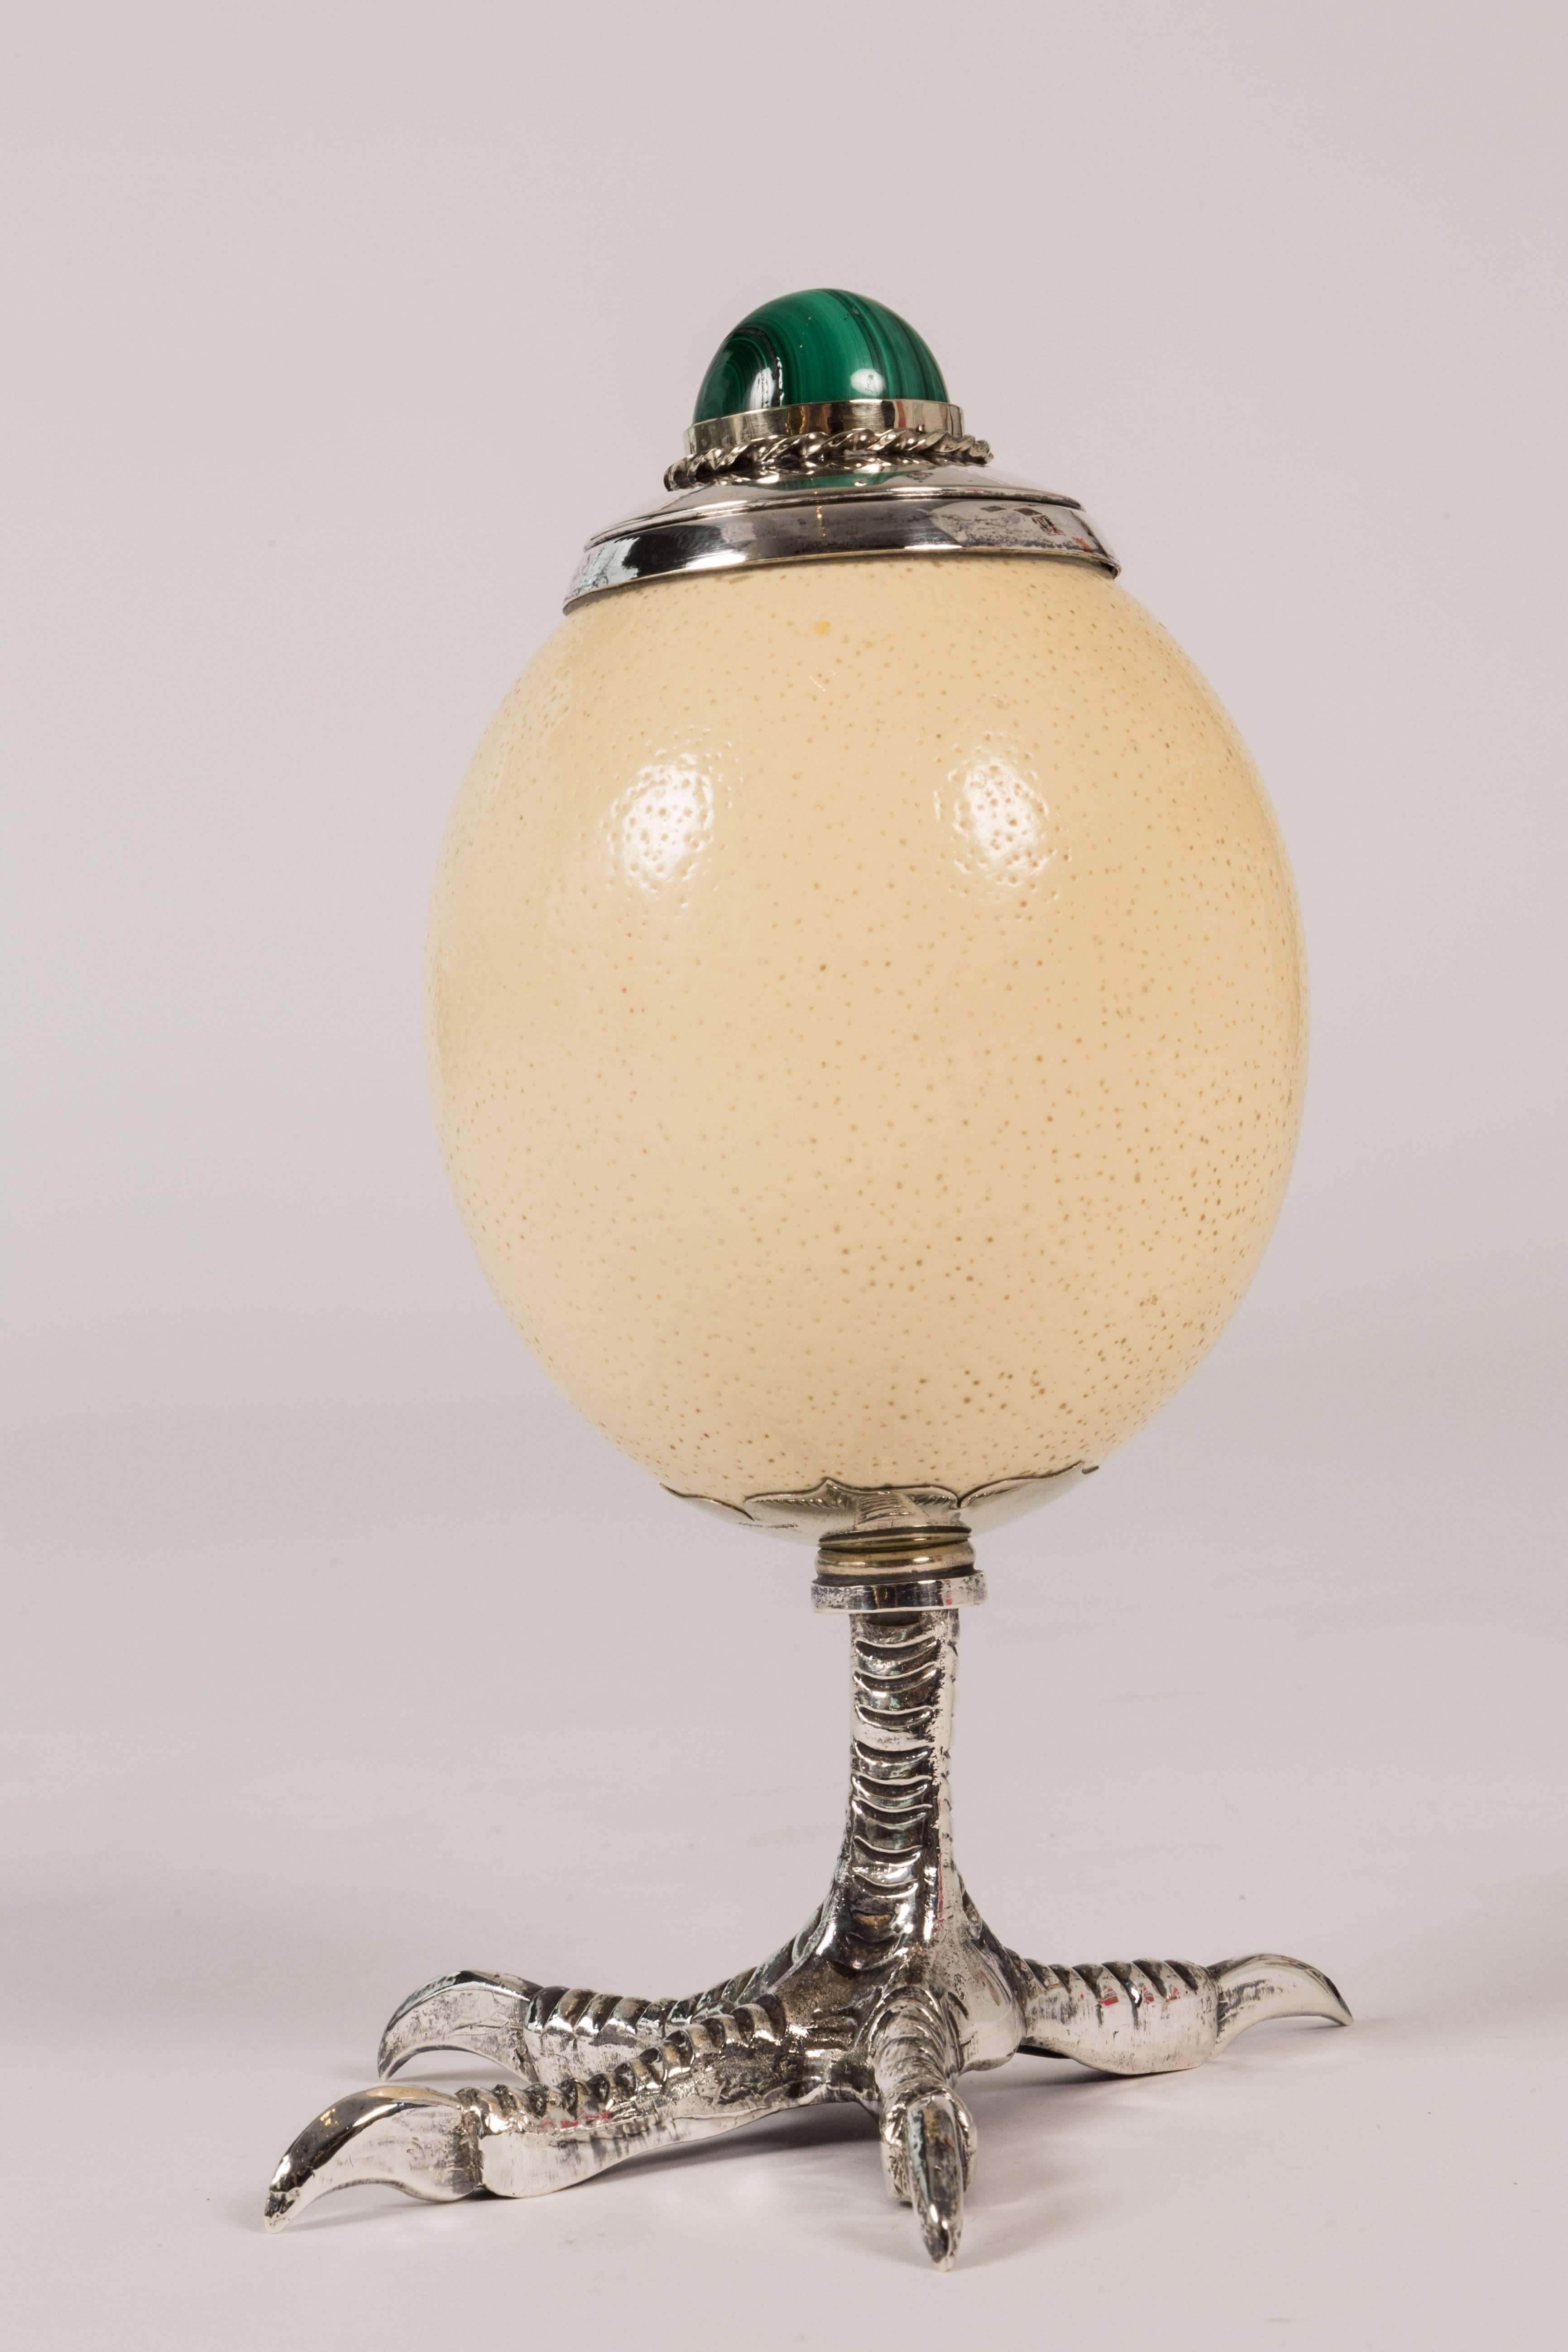 Here is a chance to own a unique Antony Redmile box, originally intended for cigarettes. Here as in many of his designs he uses an ostrich egg, after hollowing out adding a silver plated liner and lid topped off by a large malachite stone finial.